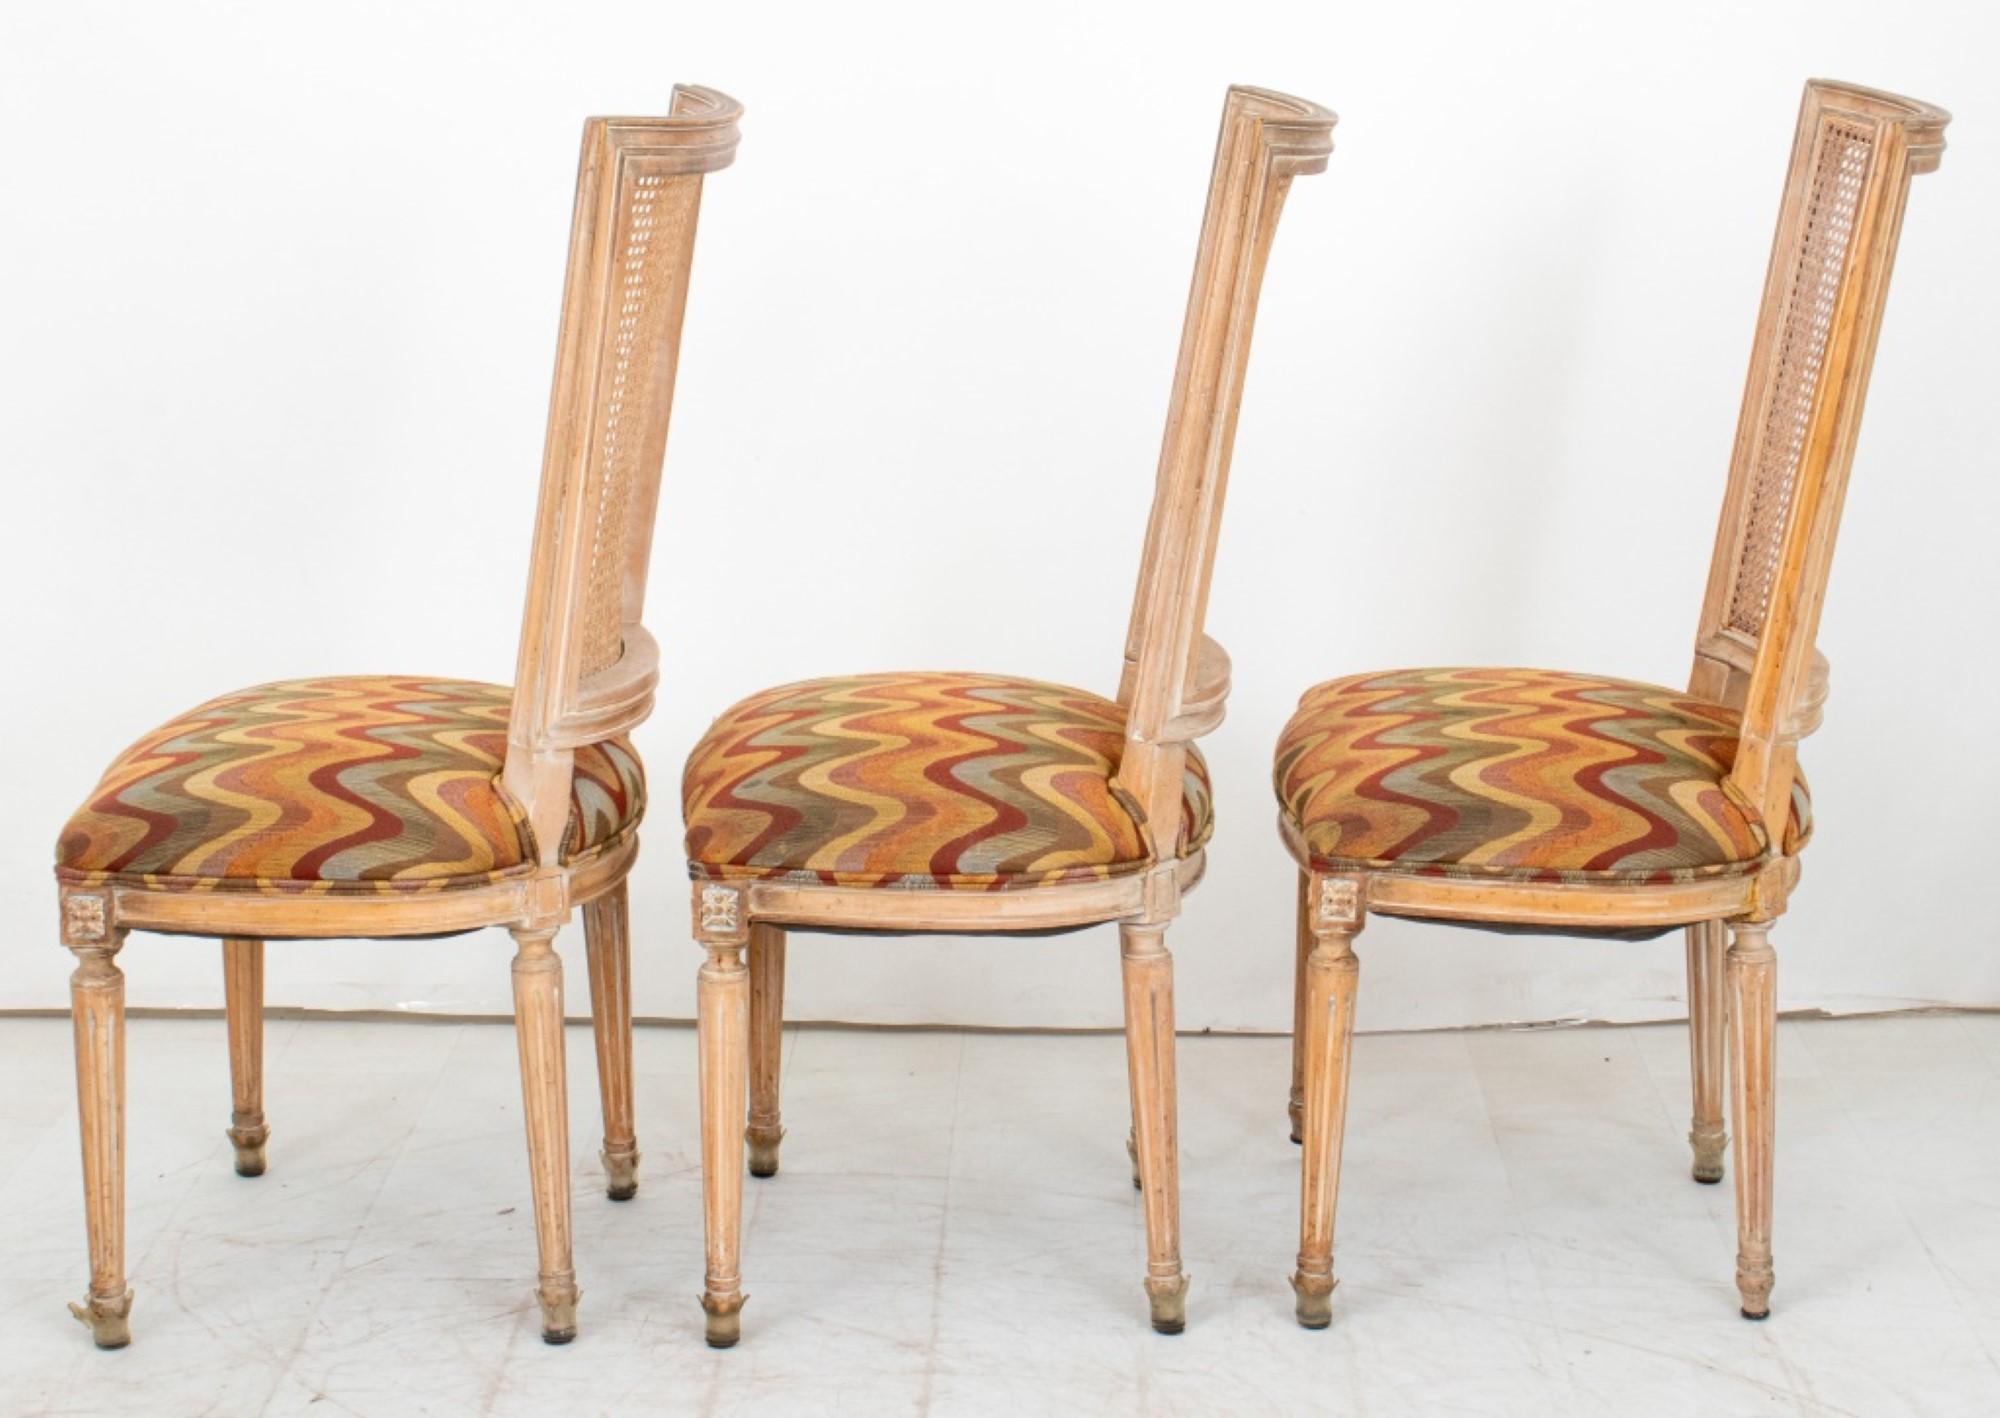 European Neoclassical Manner Side Chairs, 5 For Sale